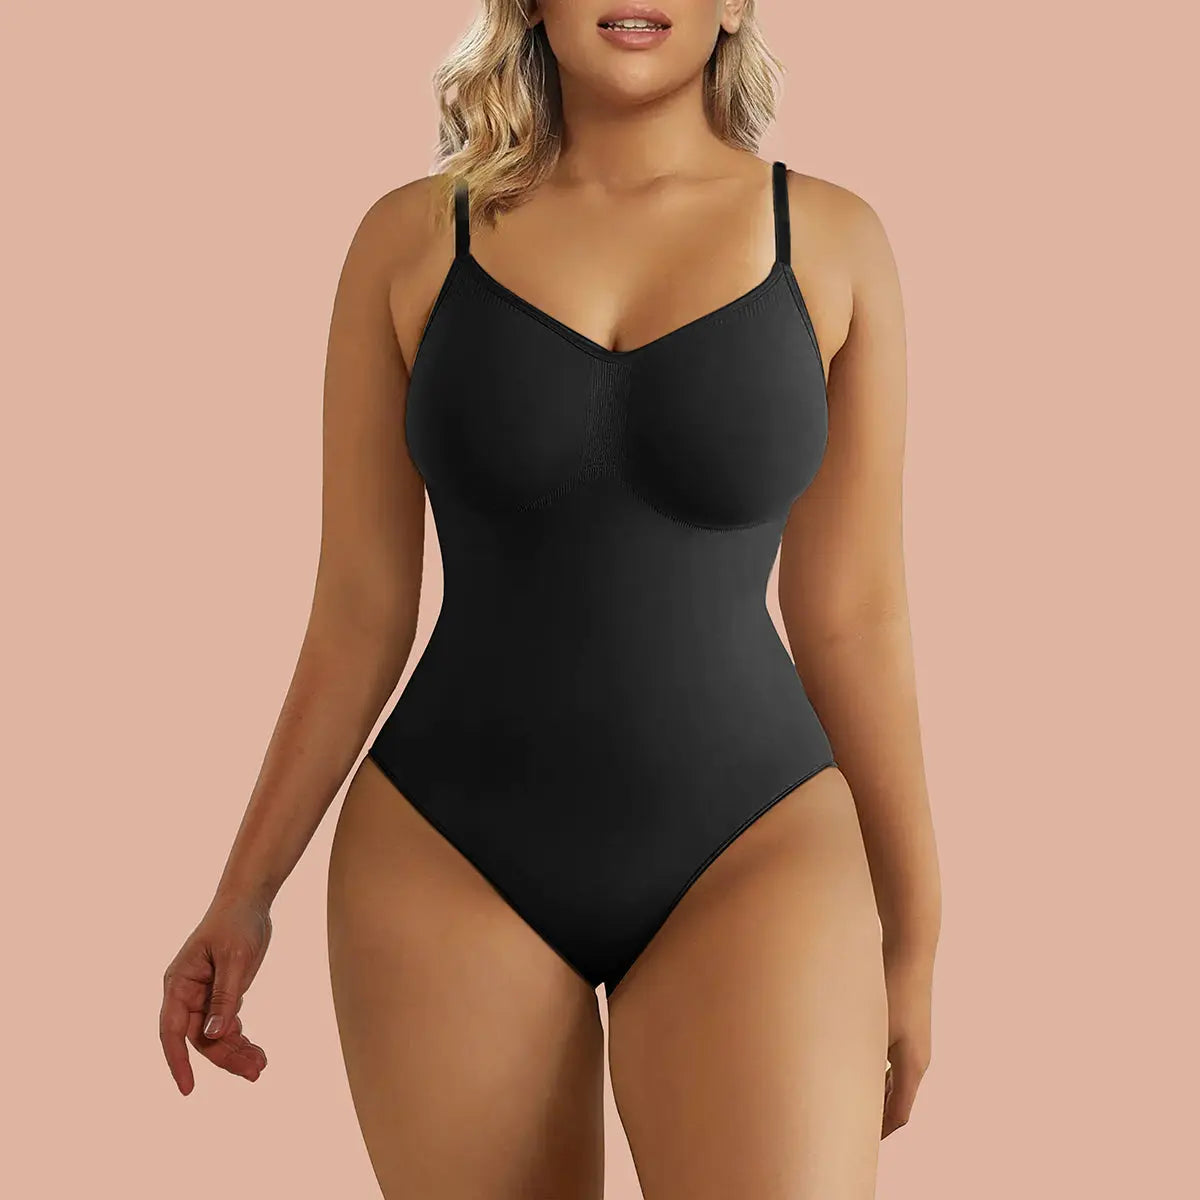 Cameland Shaperx Shapewear for Women Shaping Crotch Fit Lace Tight Strap  Bodysuit Shaping on Clearance